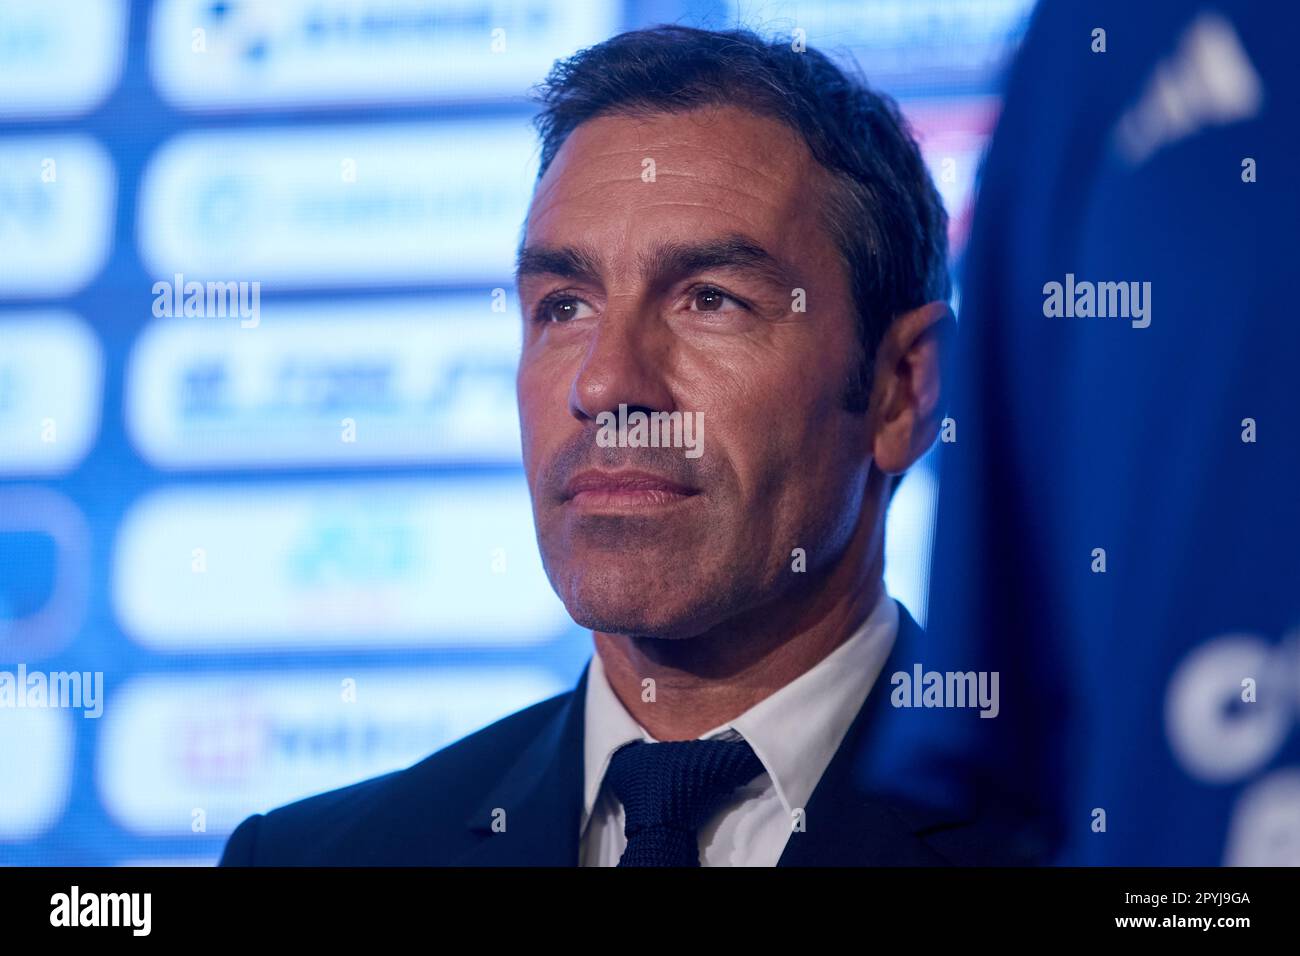 Bucharest, Romania. 3rd May, 2023: Robert Pires, former Spanish professional footballer and coach, attend the press conference about the charity football match 'Mihai Nesu Gala' between the team of former stars of the Romanian team and a European team of FIFPRO Europe Division, in Bucharest. Stock Photo